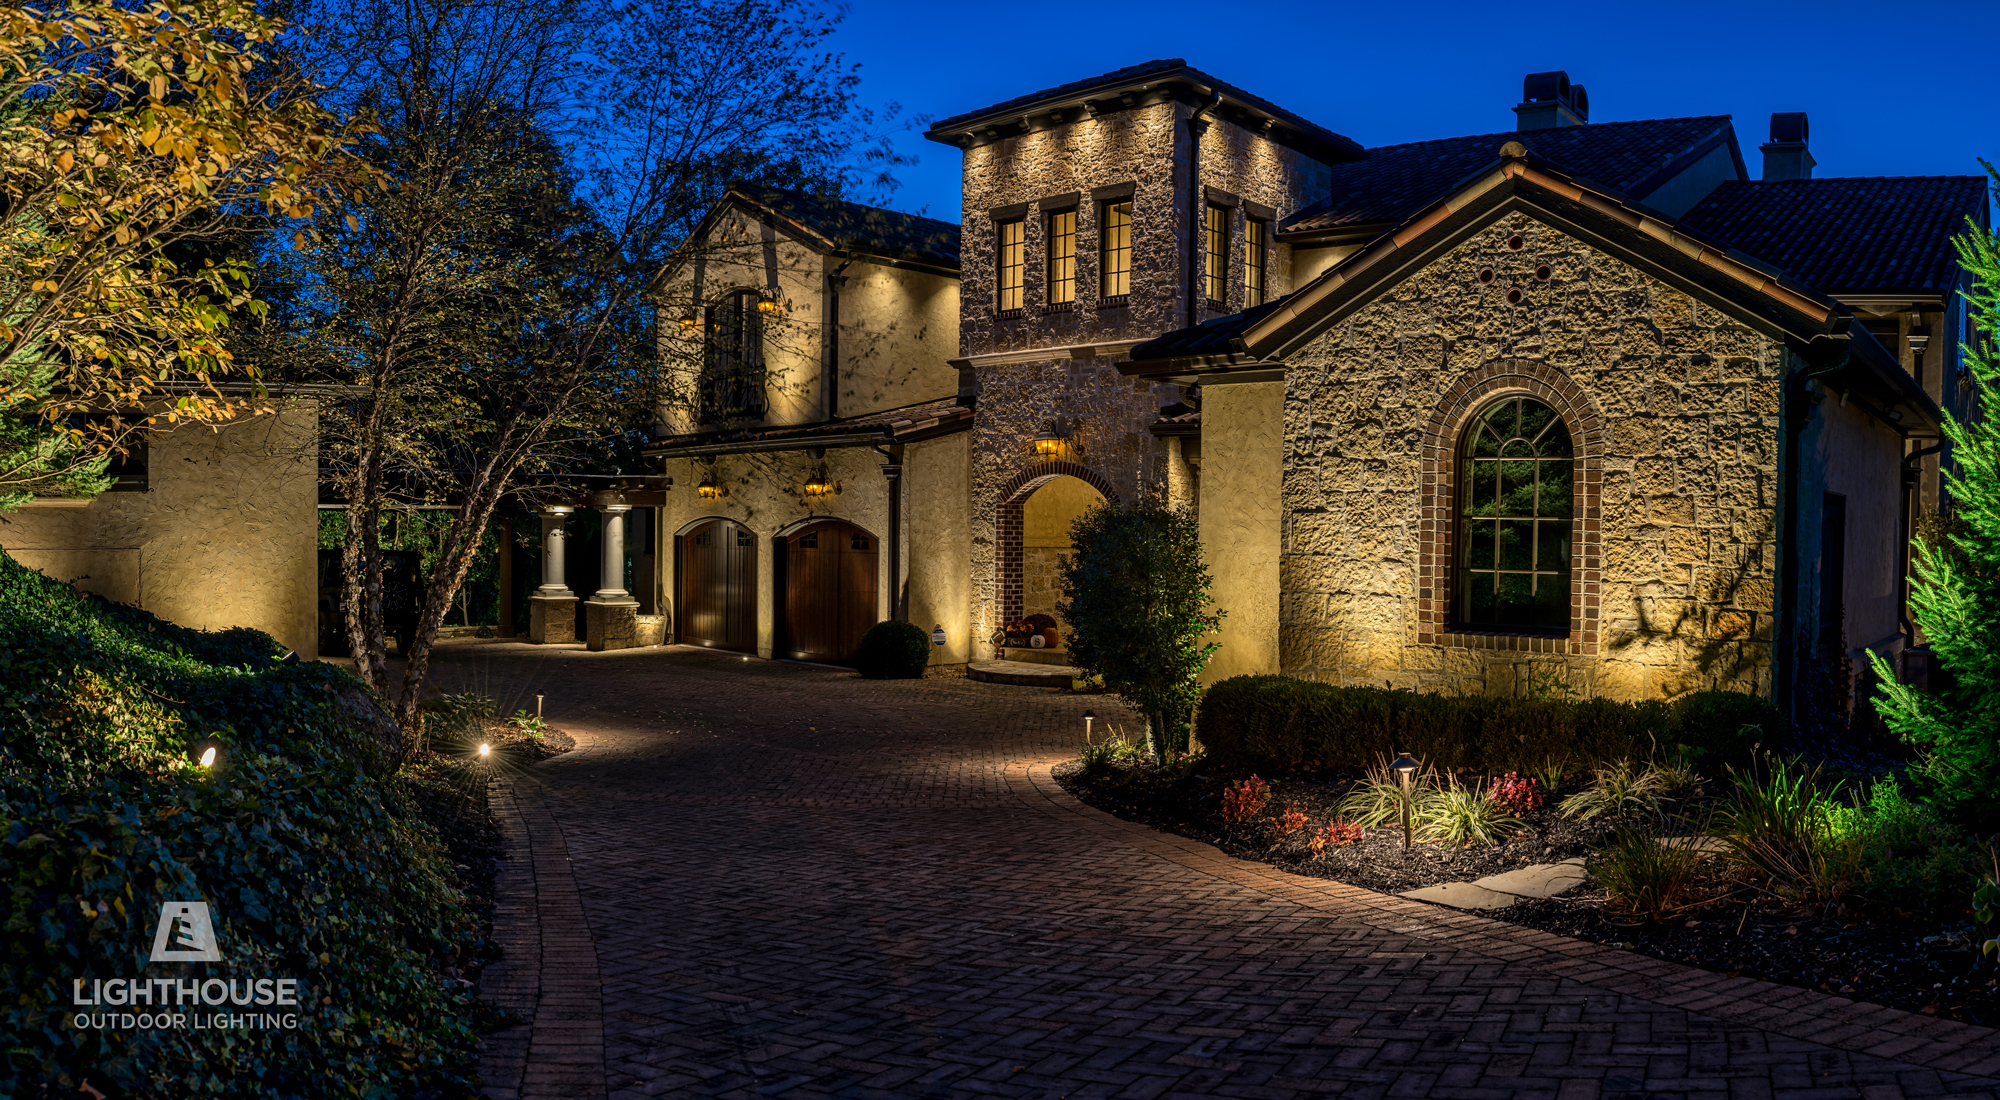 The cost of landscape lighting in Nottingham, PA